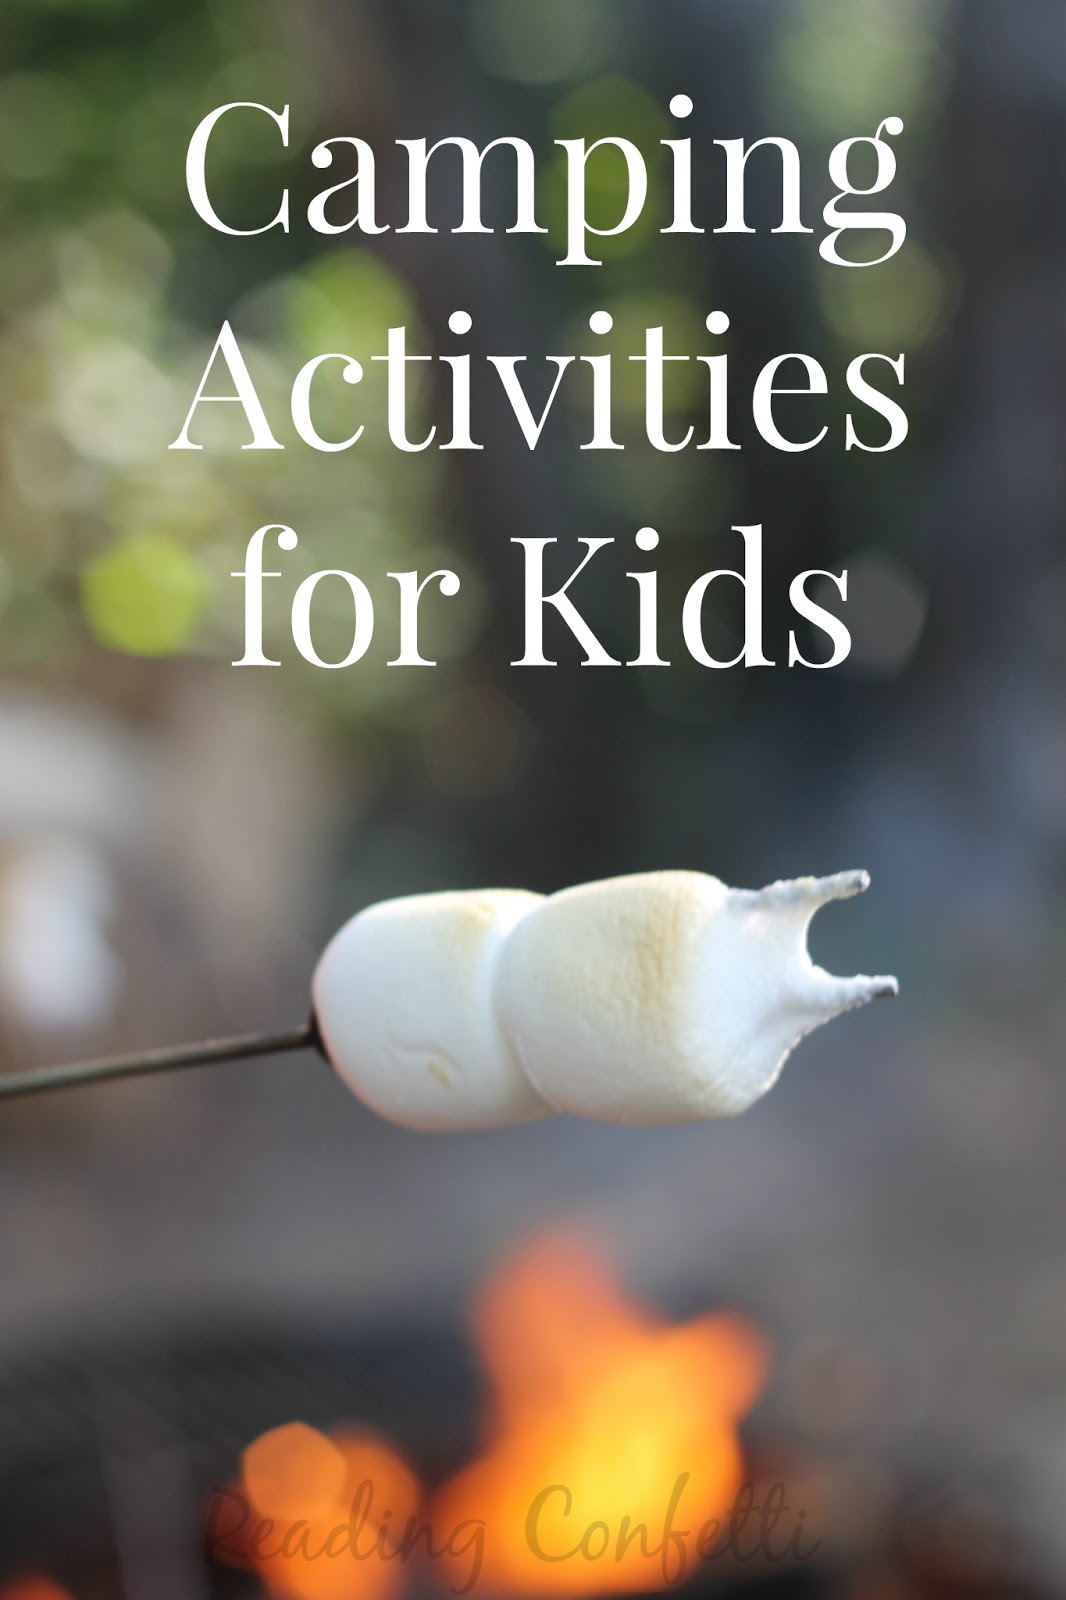 15 camping activities for kids